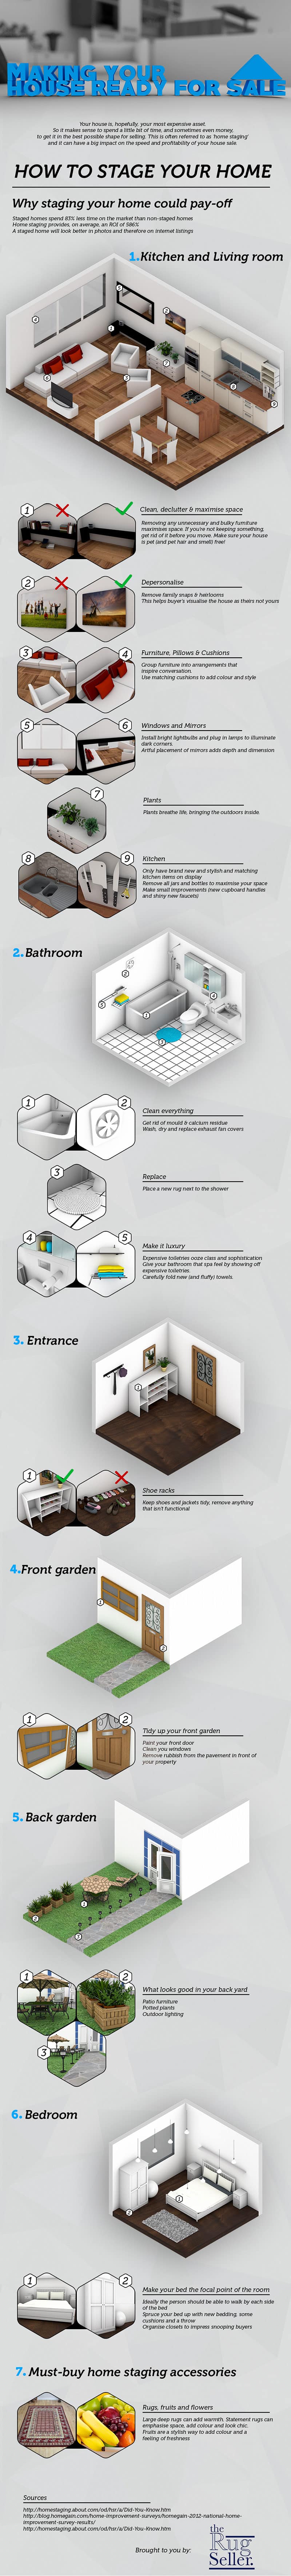  home-staging 